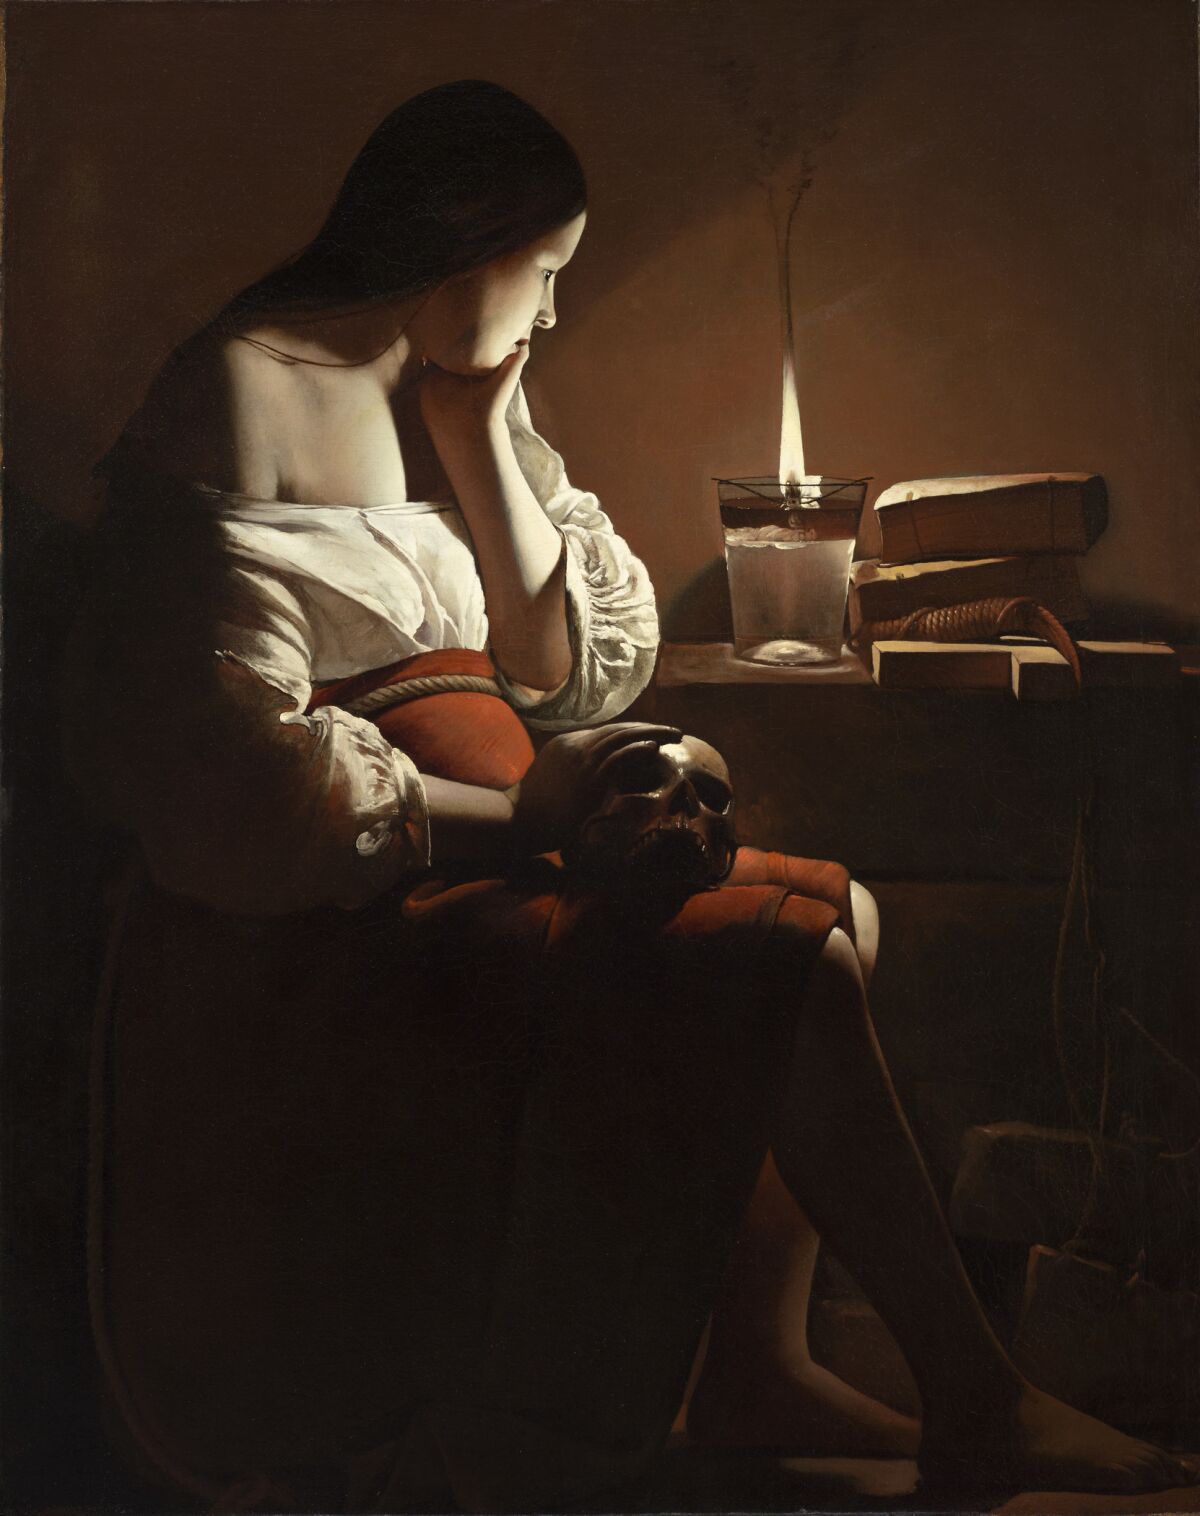 LACMA's signature European painting, Georges de La Tour's "The Magdalen With the Smoking Flame," was a 1977 gift of the Ahmanson Foundation.